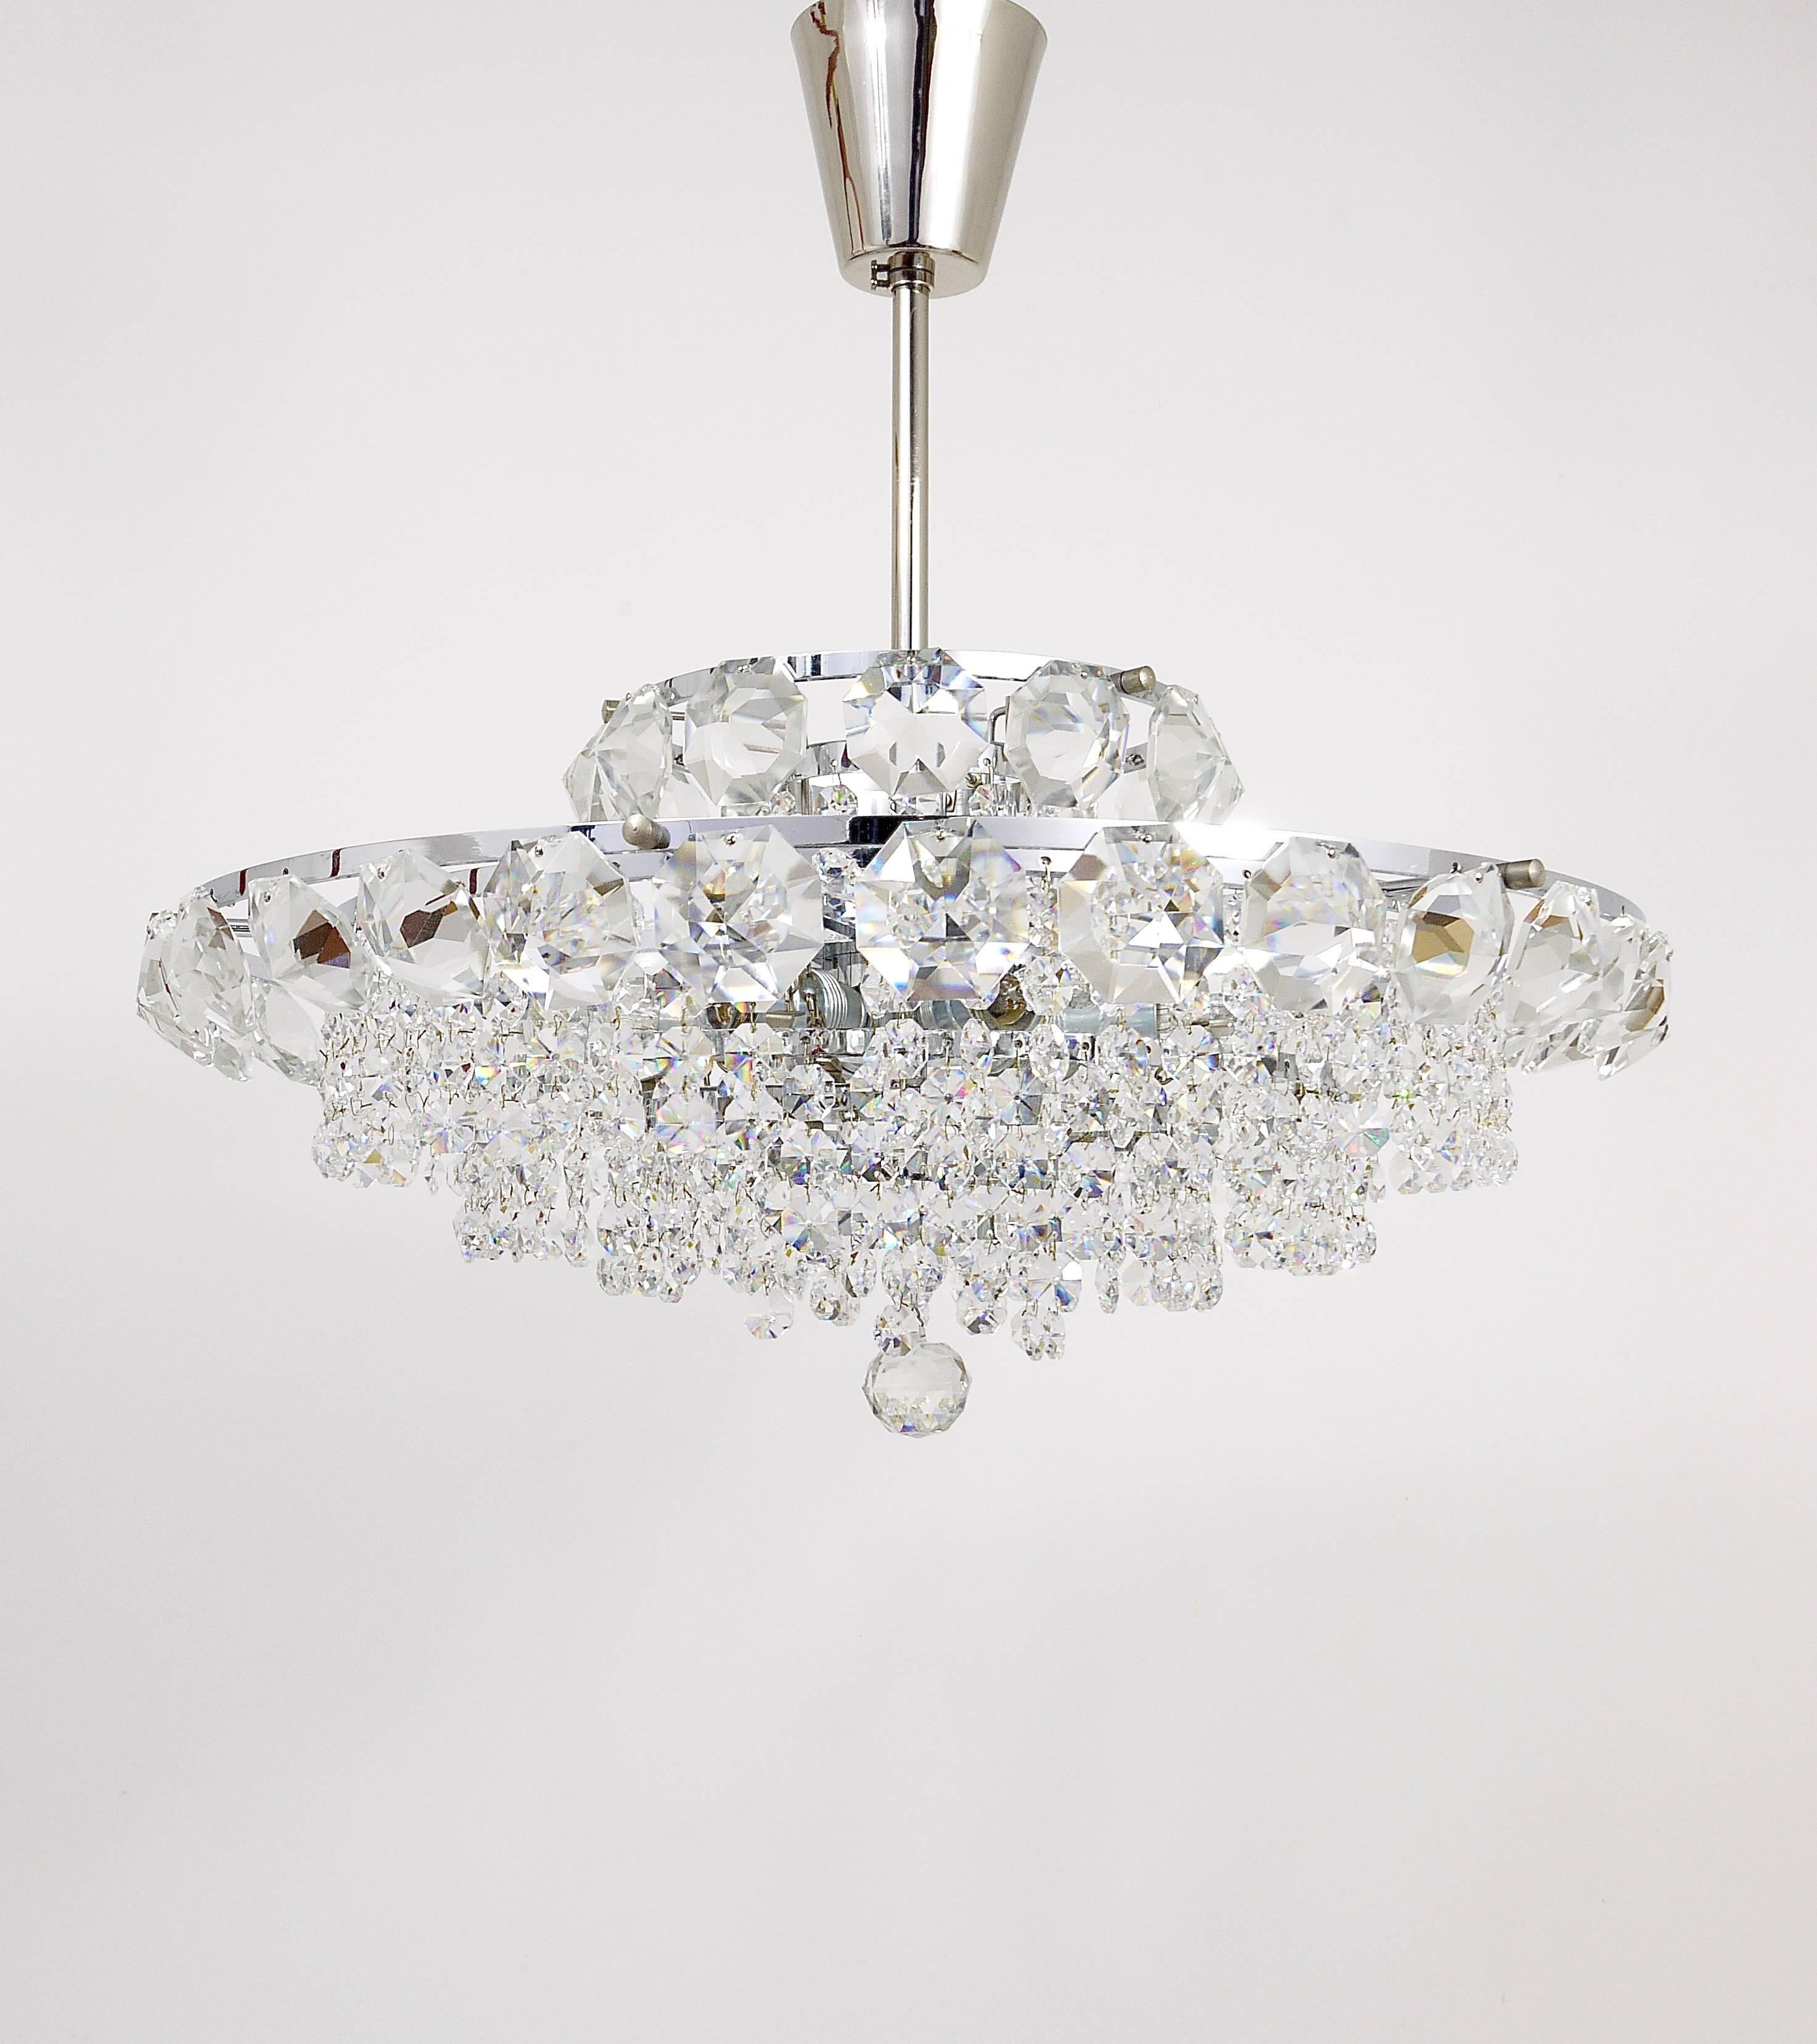 A beautiful and elegant chrome-plated crystal chandelier by Bakalowits Vienna from the 1950s. It has five tiers, fully covered by diamond-shaped faceted crystals in different sizes. This chandelier has six light sources and has been carefully